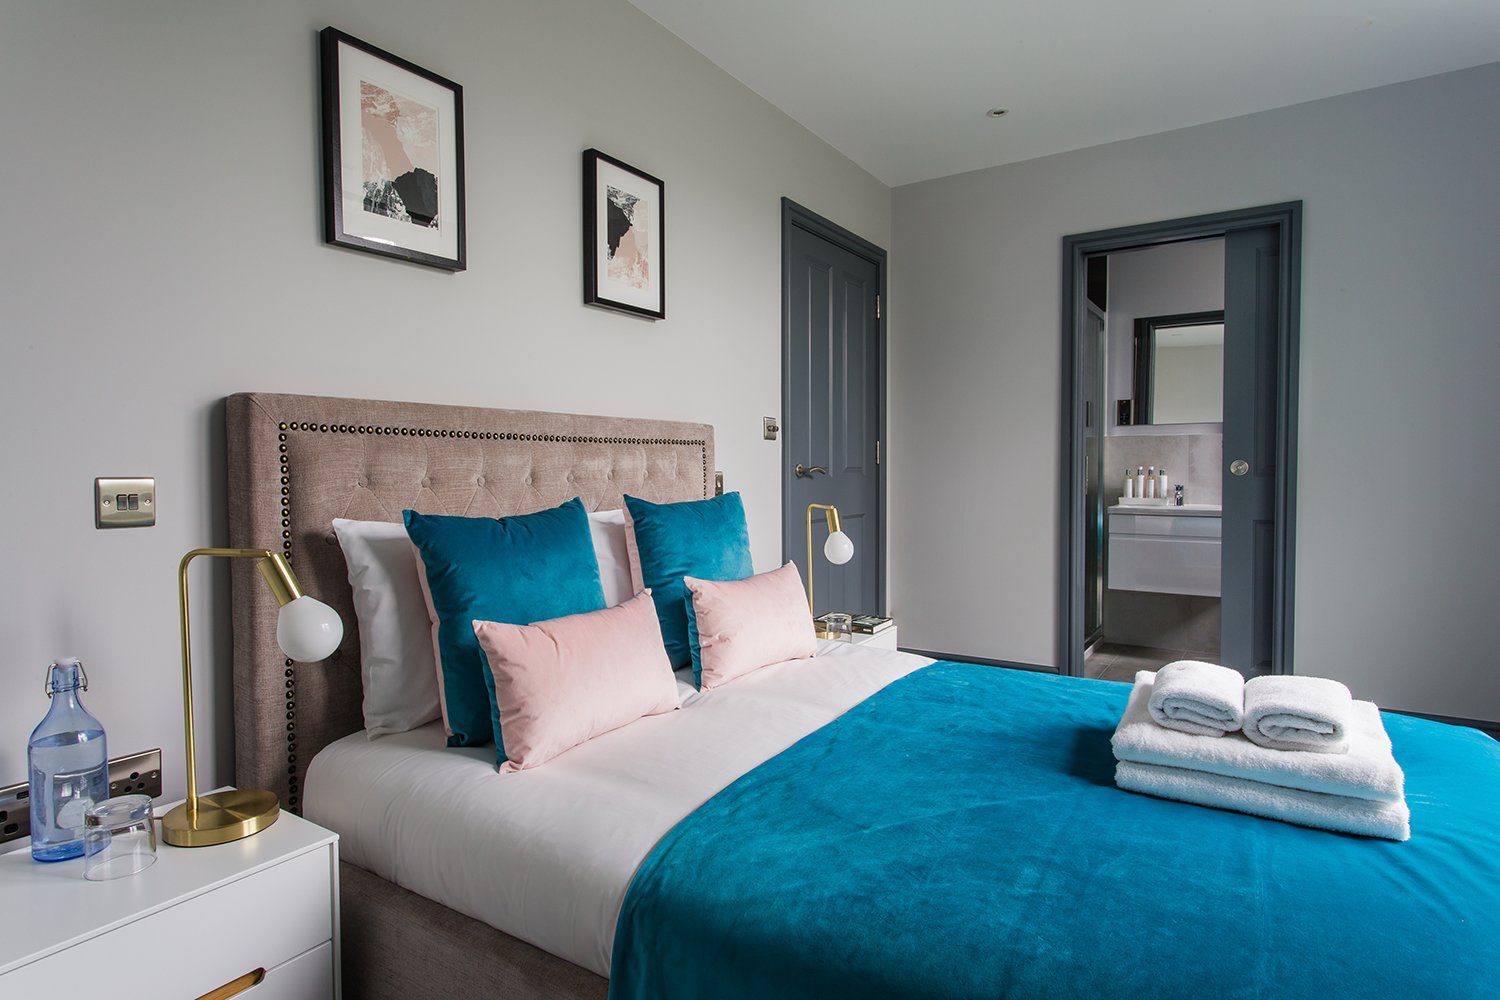 Farnborough Serviced Apartments available now! Book Corporate Short Let Accommodation in Hampshire: All Bills Incl - No Fees - Best Rates -Call: 02086913920